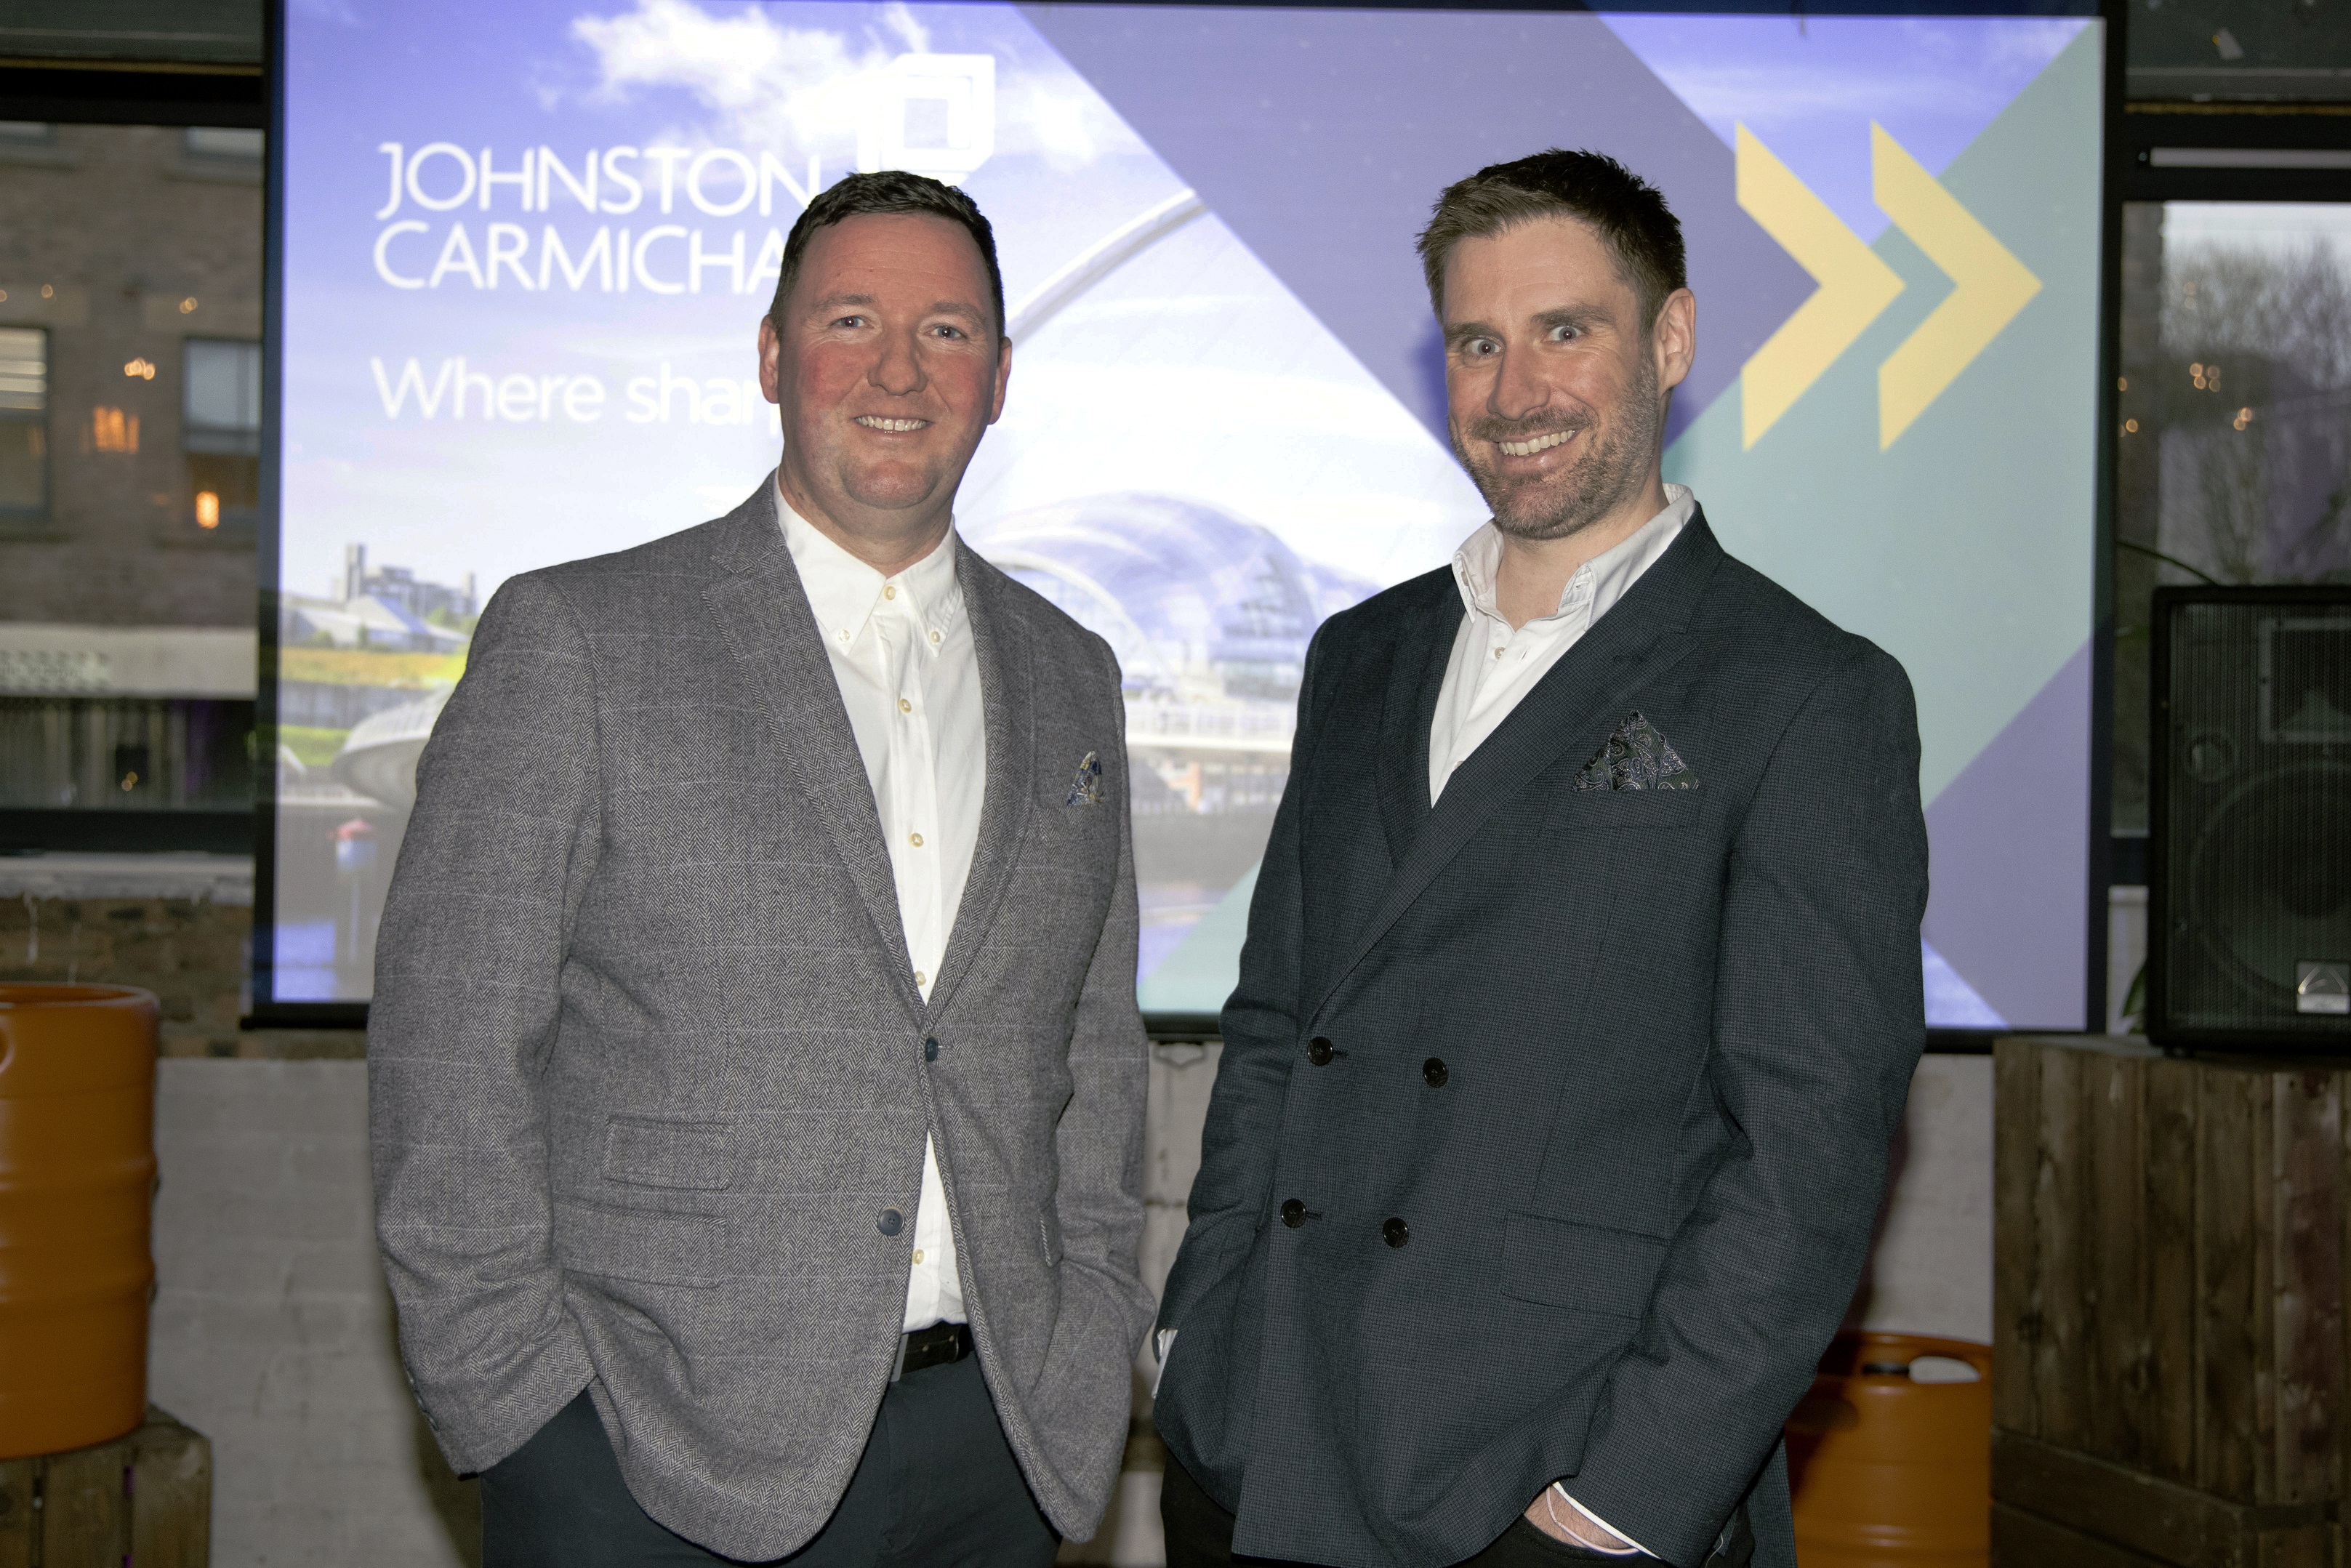 CLIENTS AND RECRUITMENT TOP PRIORITIES FOR JOHNSTON CARMICHAEL FOLLOWING SUCCESSFUL EXPANSION INTO THE NORTH EAST